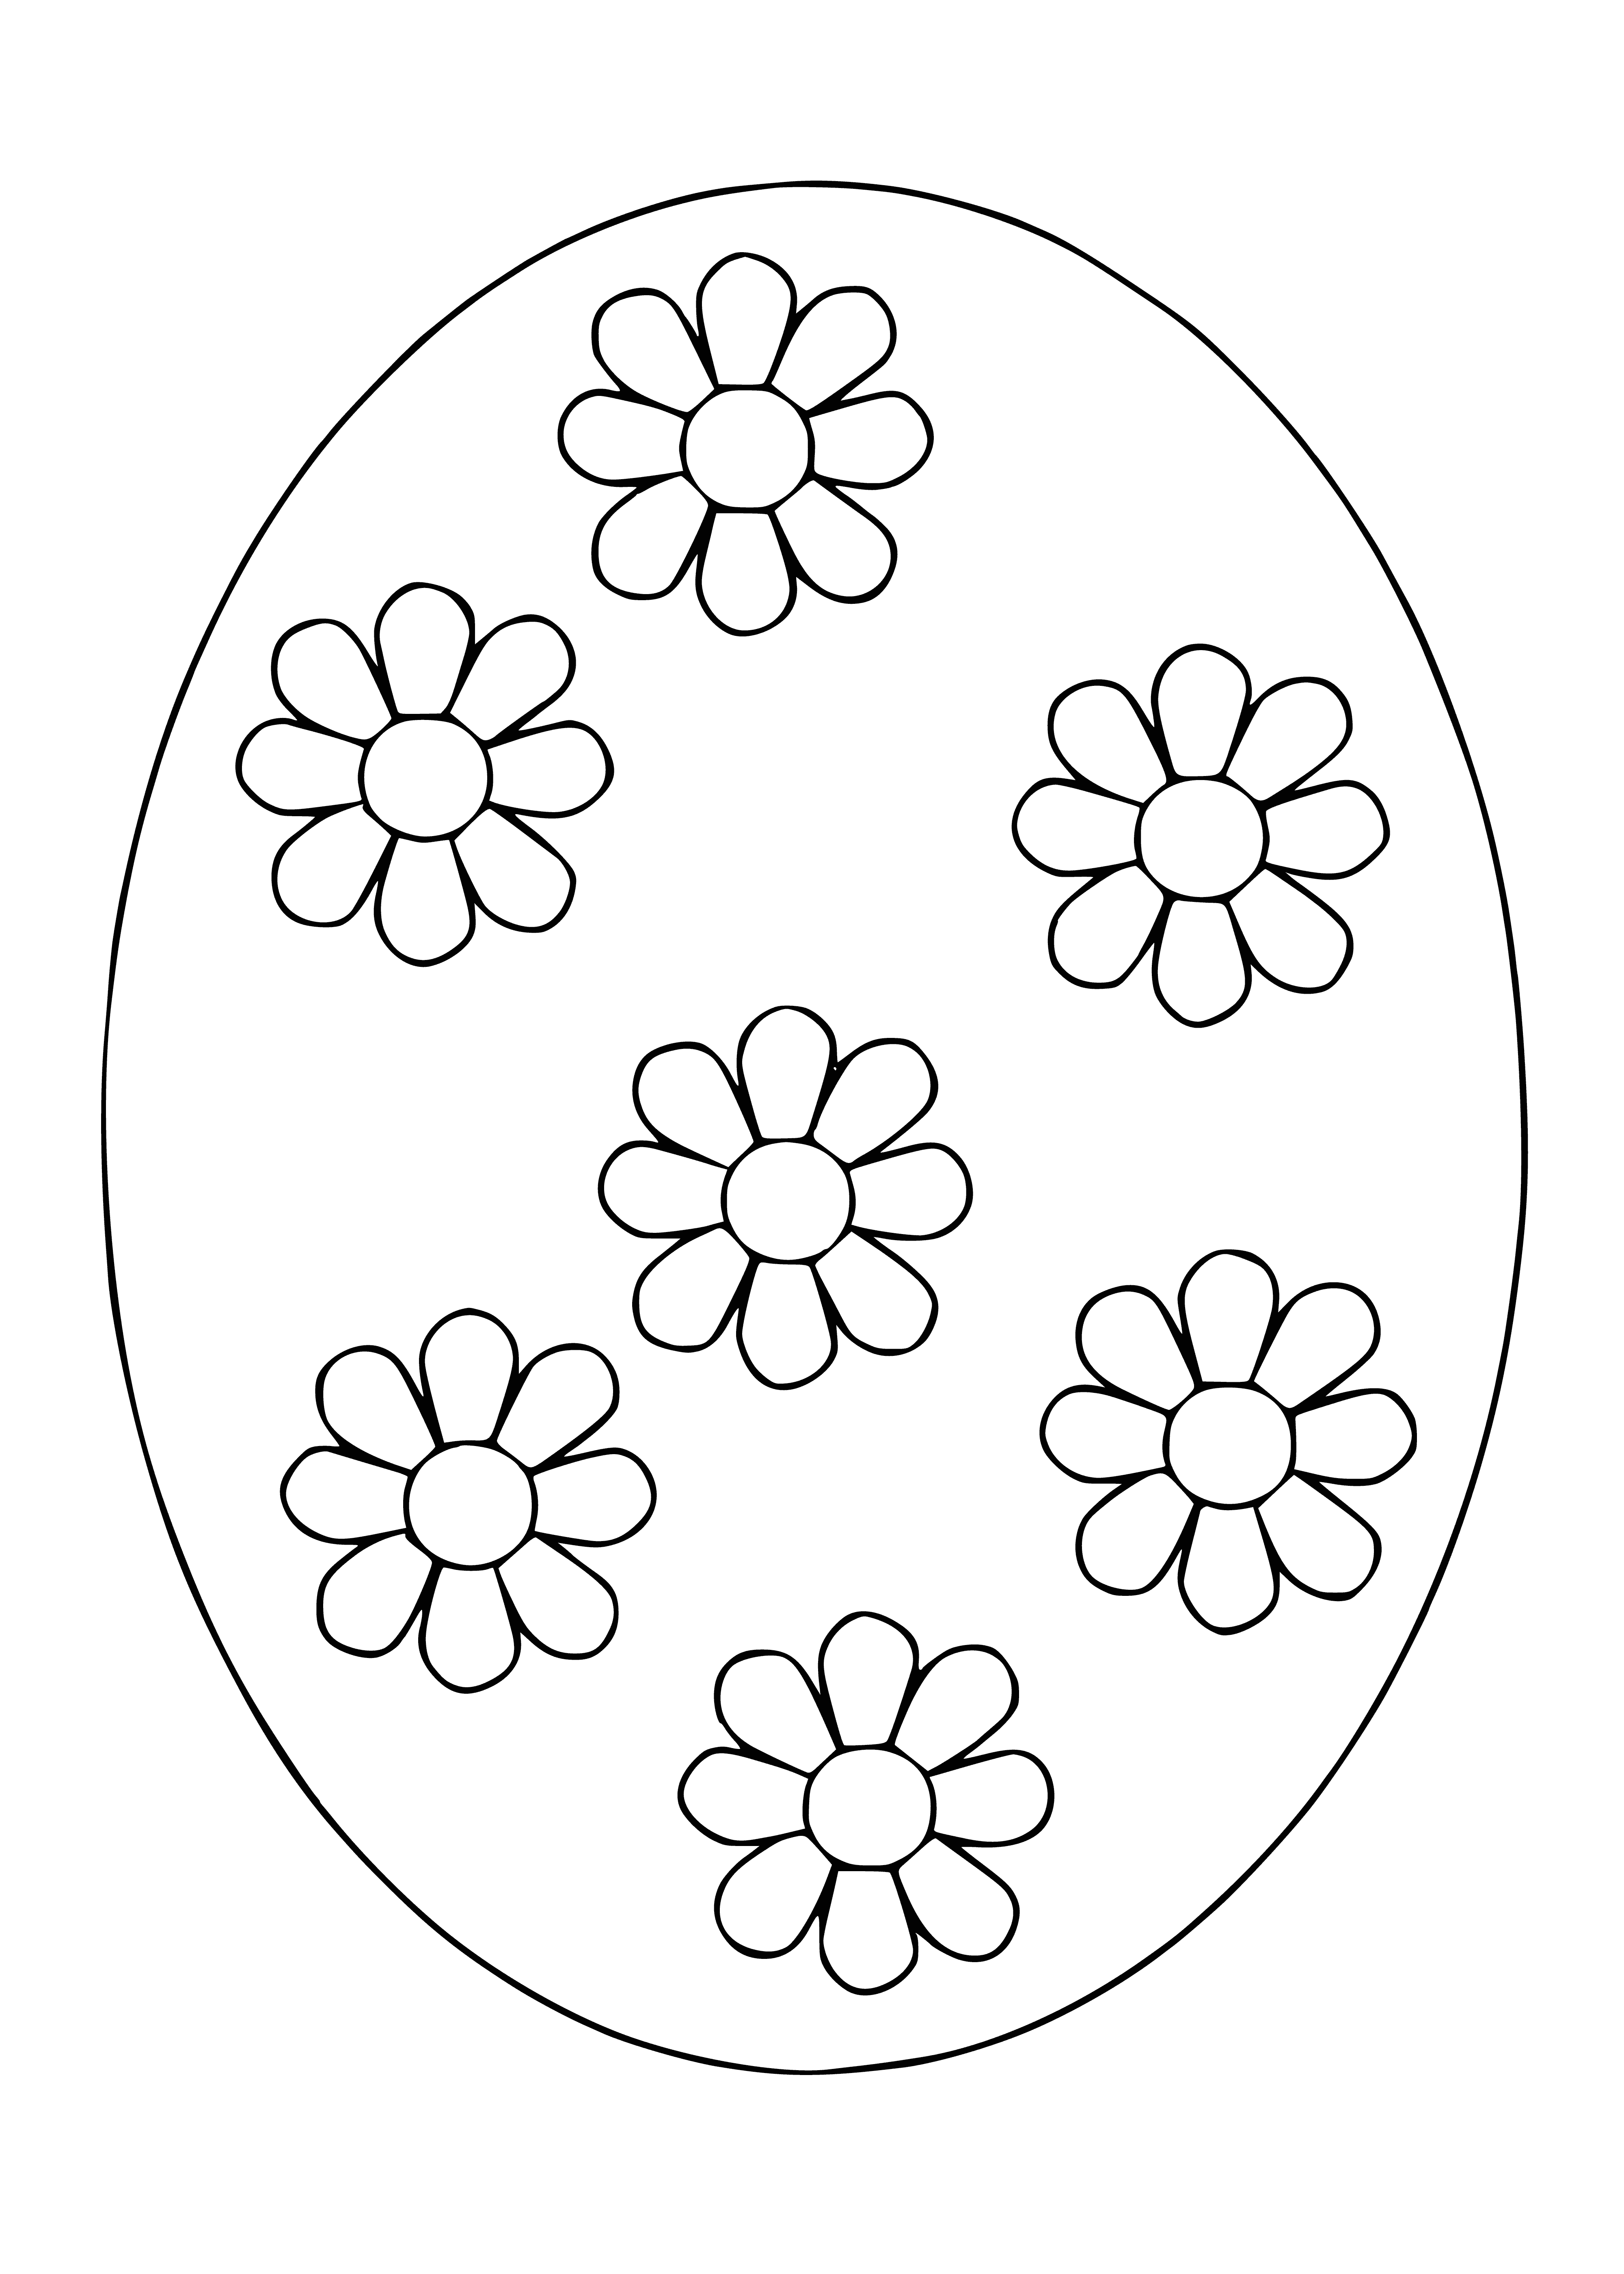 coloring page: Four Easter eggs, two with chicks, one hugged by a bunny.